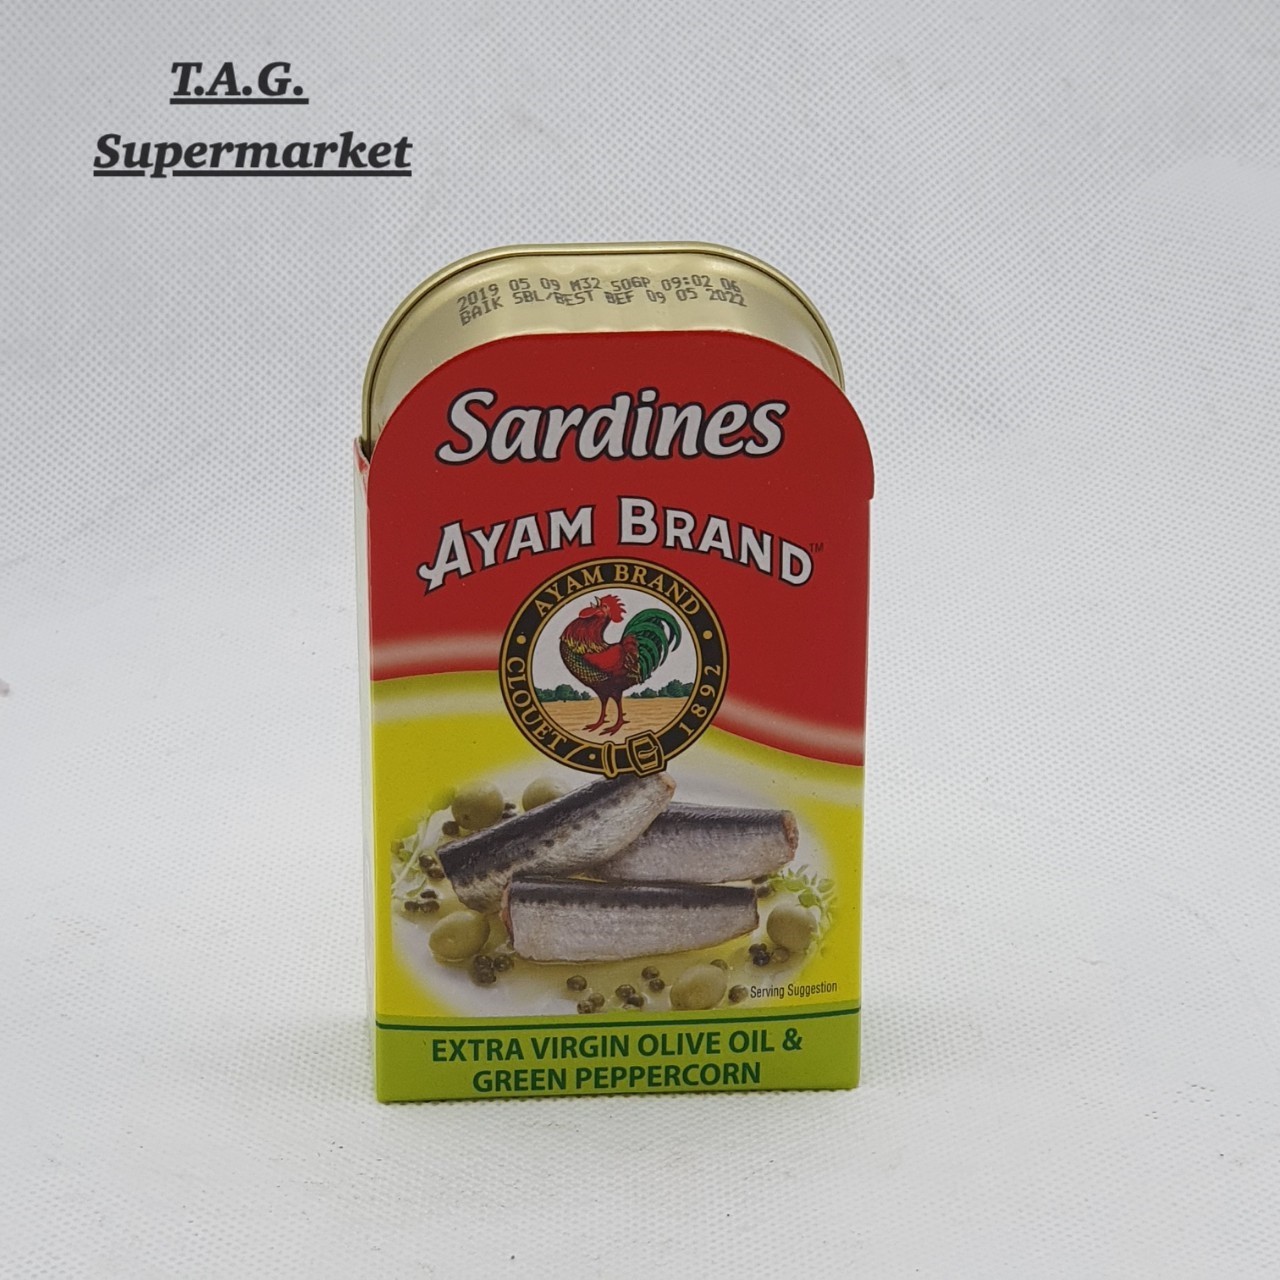 Ayam sardines in extra virgin olive oil&green peppercorn